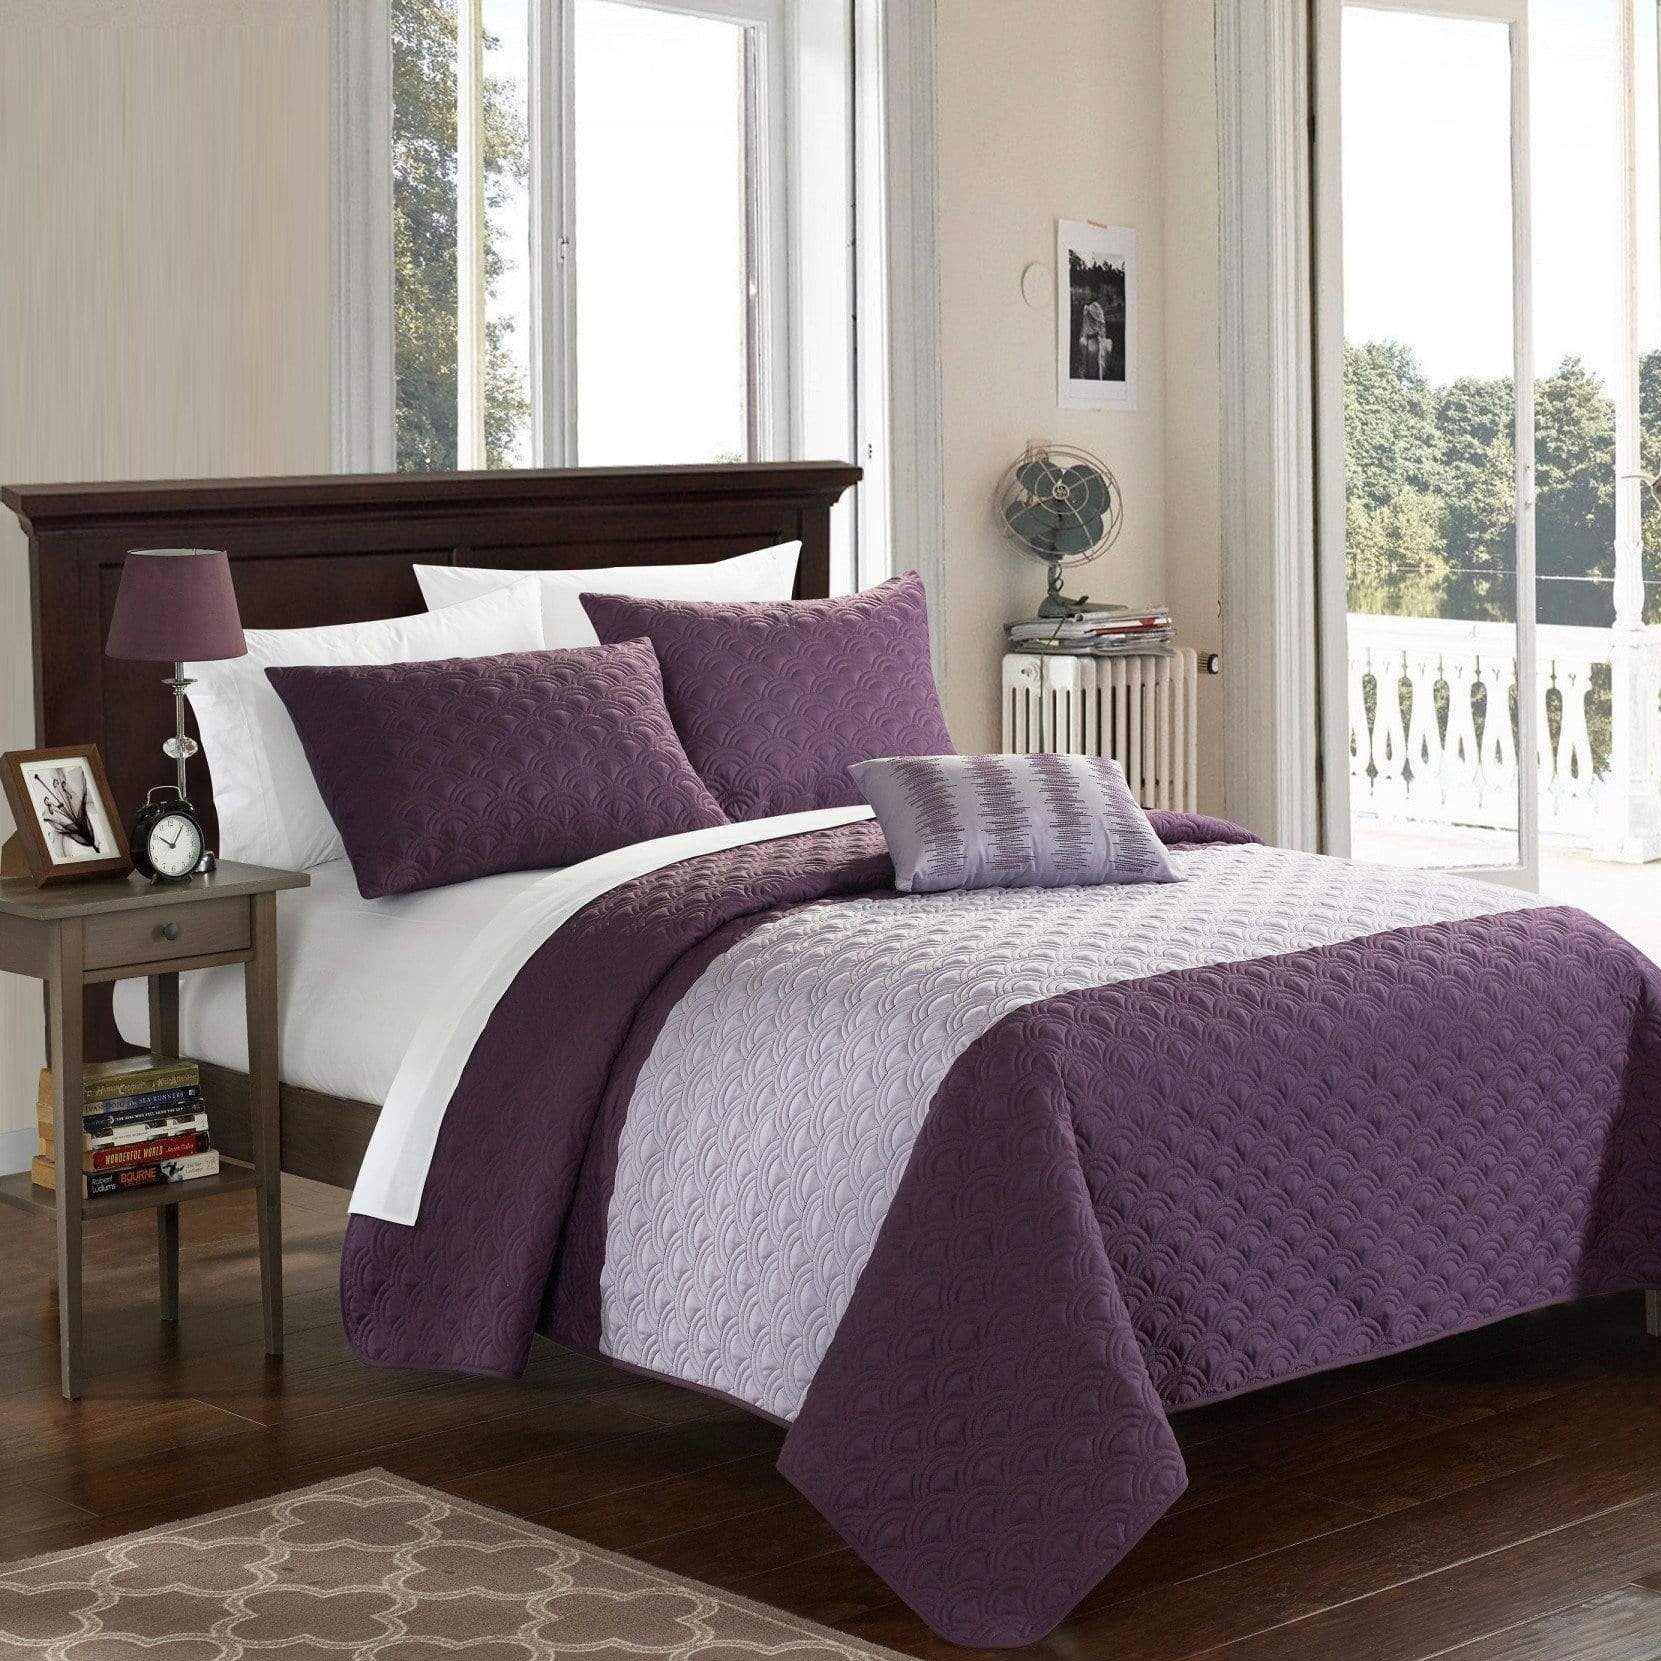 Dominic 4 Piece Embroidered Quilt Set